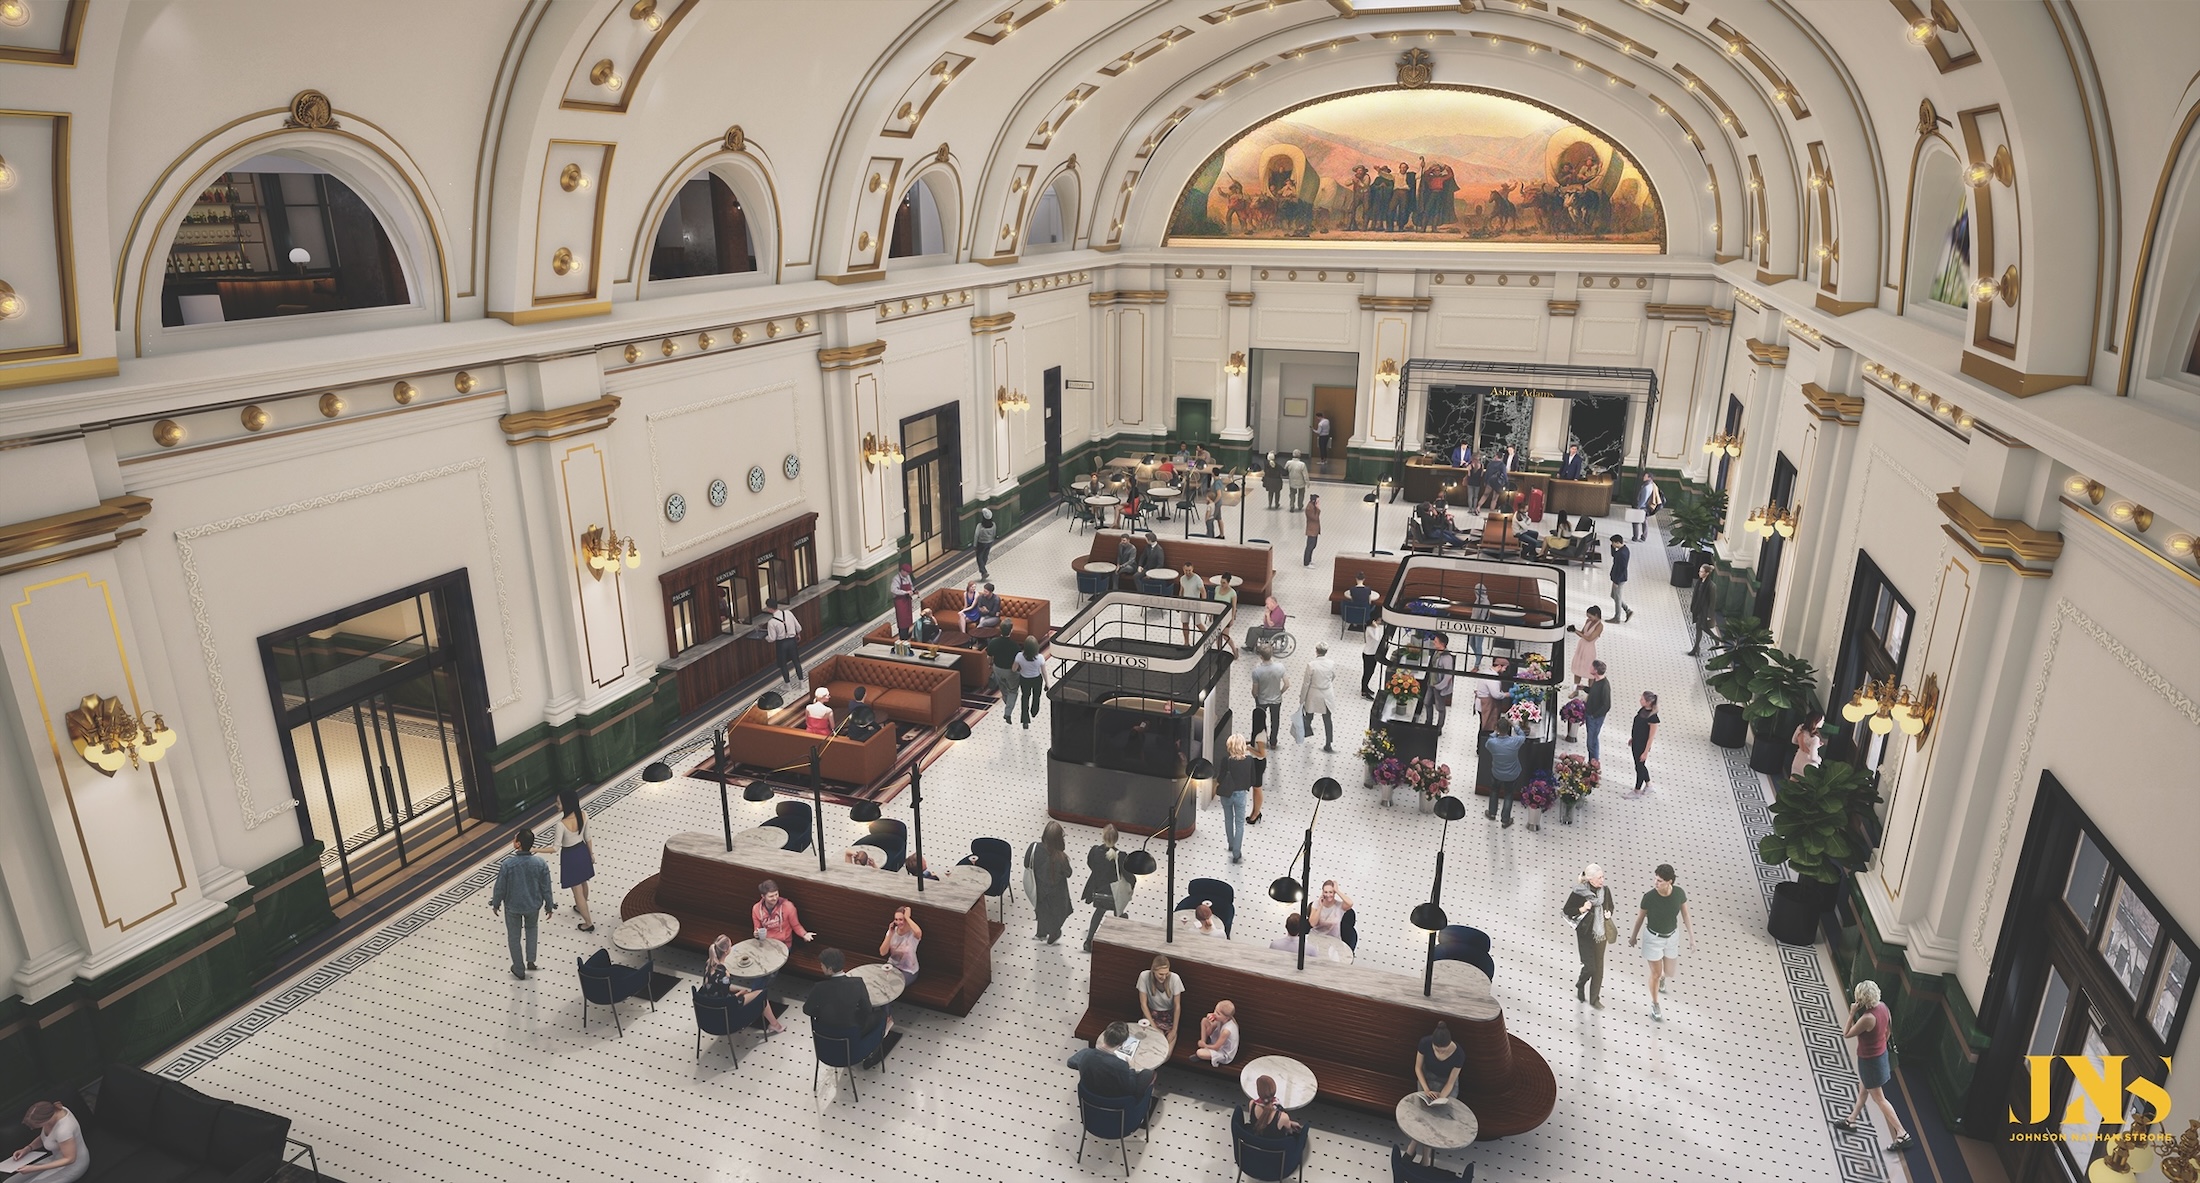 The historic Union Pacific Train Depot is being adaptively reused for the new Asher Adams Hotel, which will include a stunning Grand Hall (pictured). Photo courtesy Athens Group